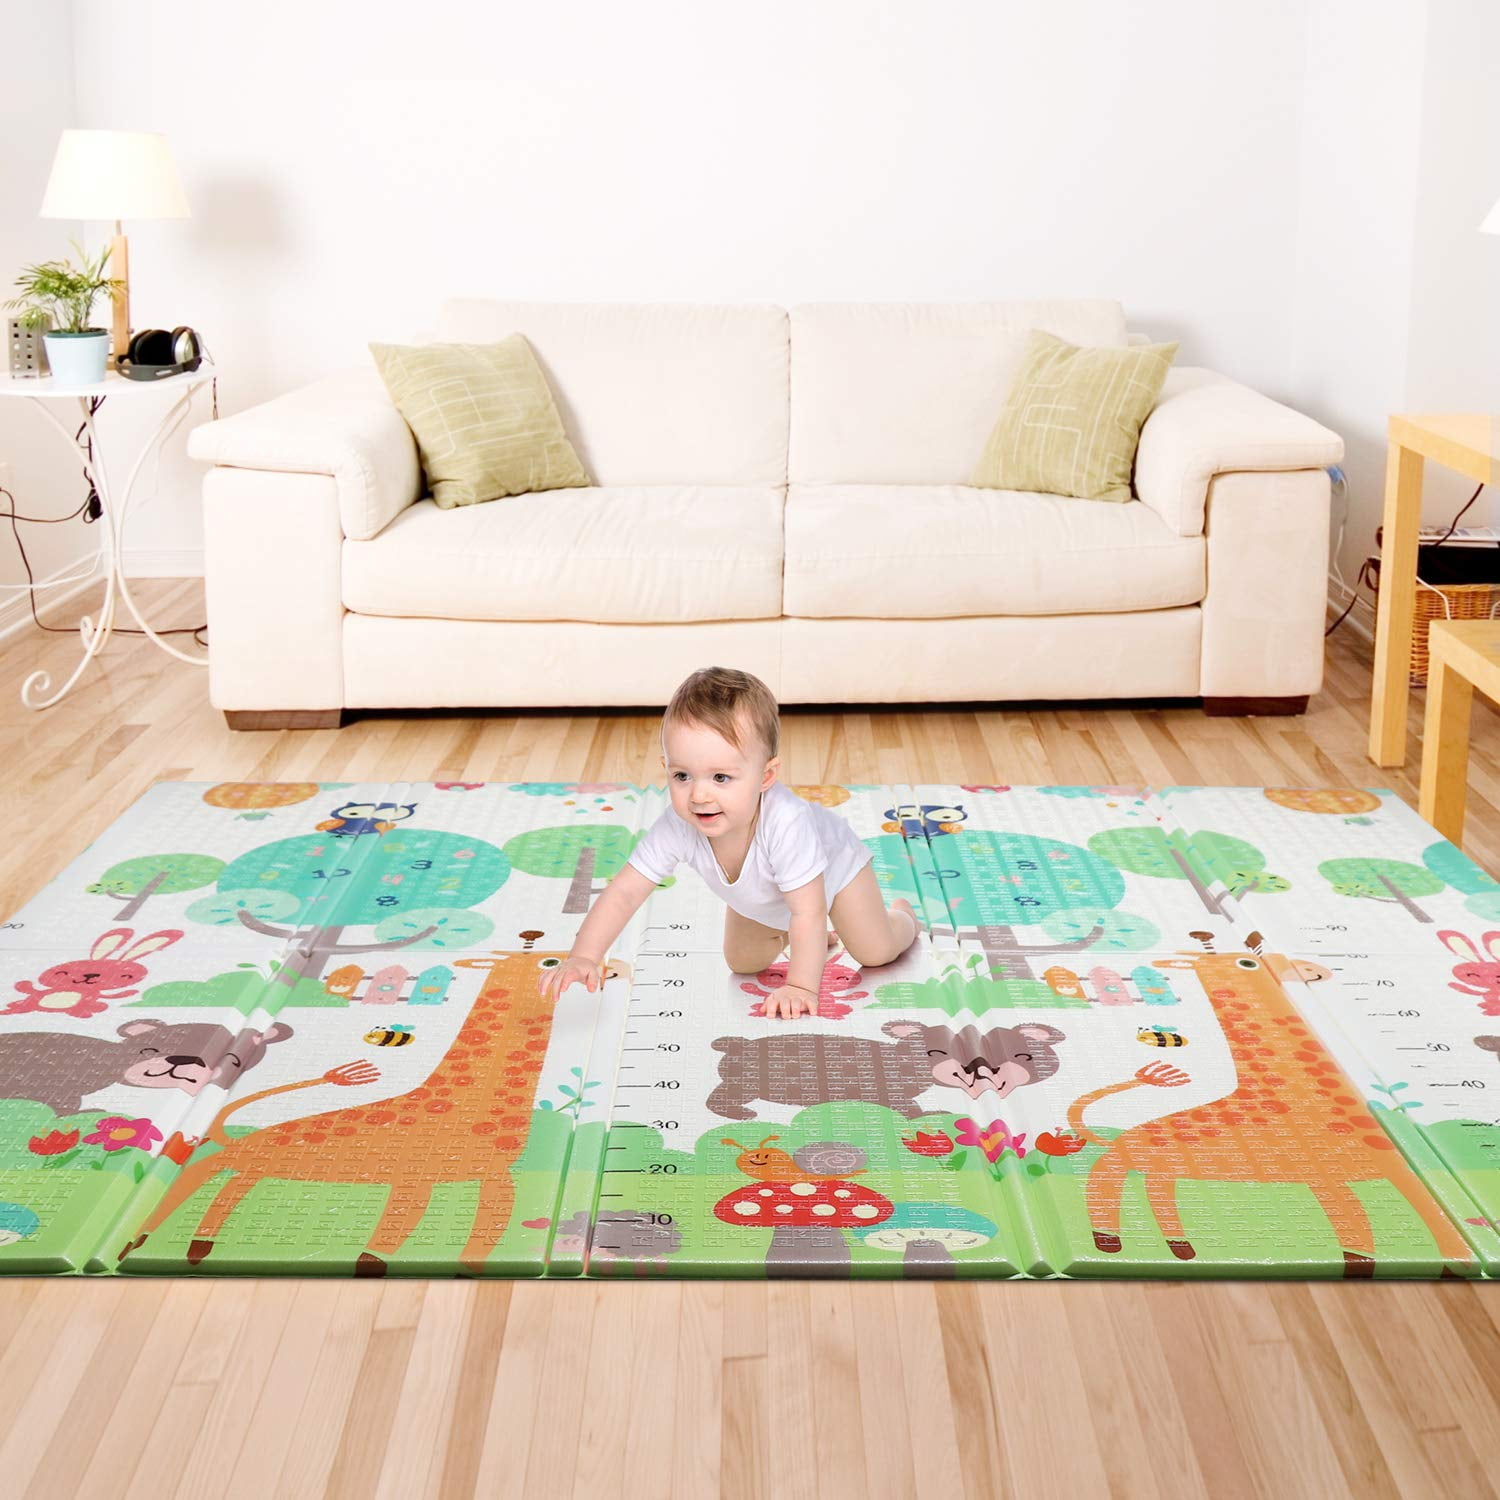 Toddlers Bammax Play Mat Non Toxic Baby Crawling Mat Waterproof Kids Playmat for Babies Infants